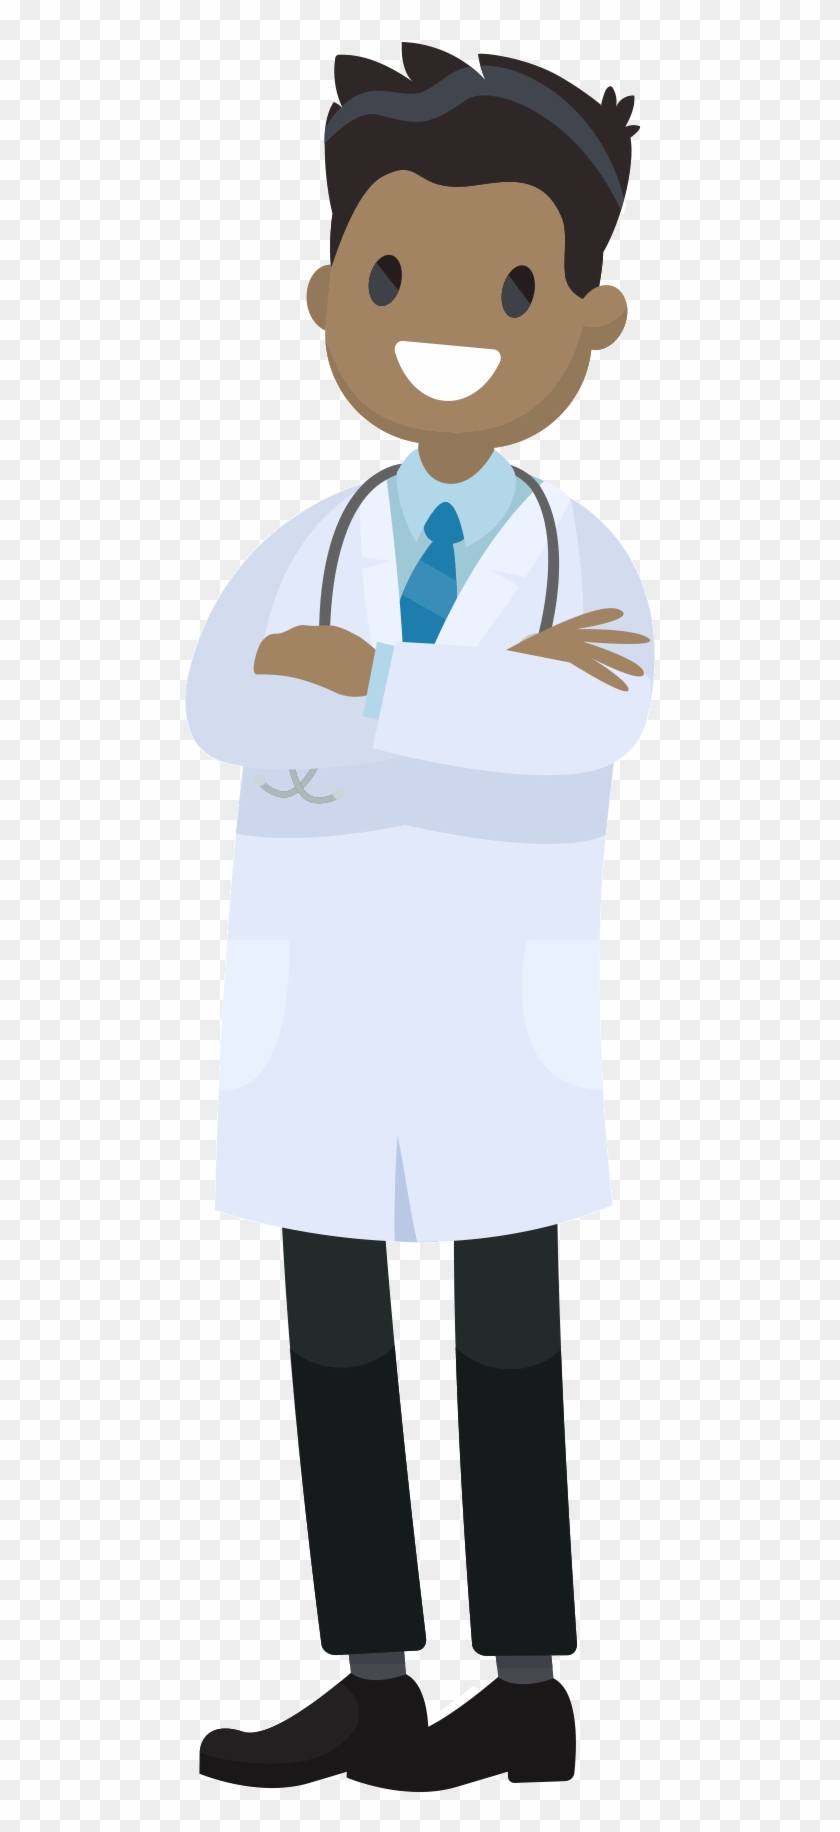 Doctors clipart general physician. Illustration hd png 